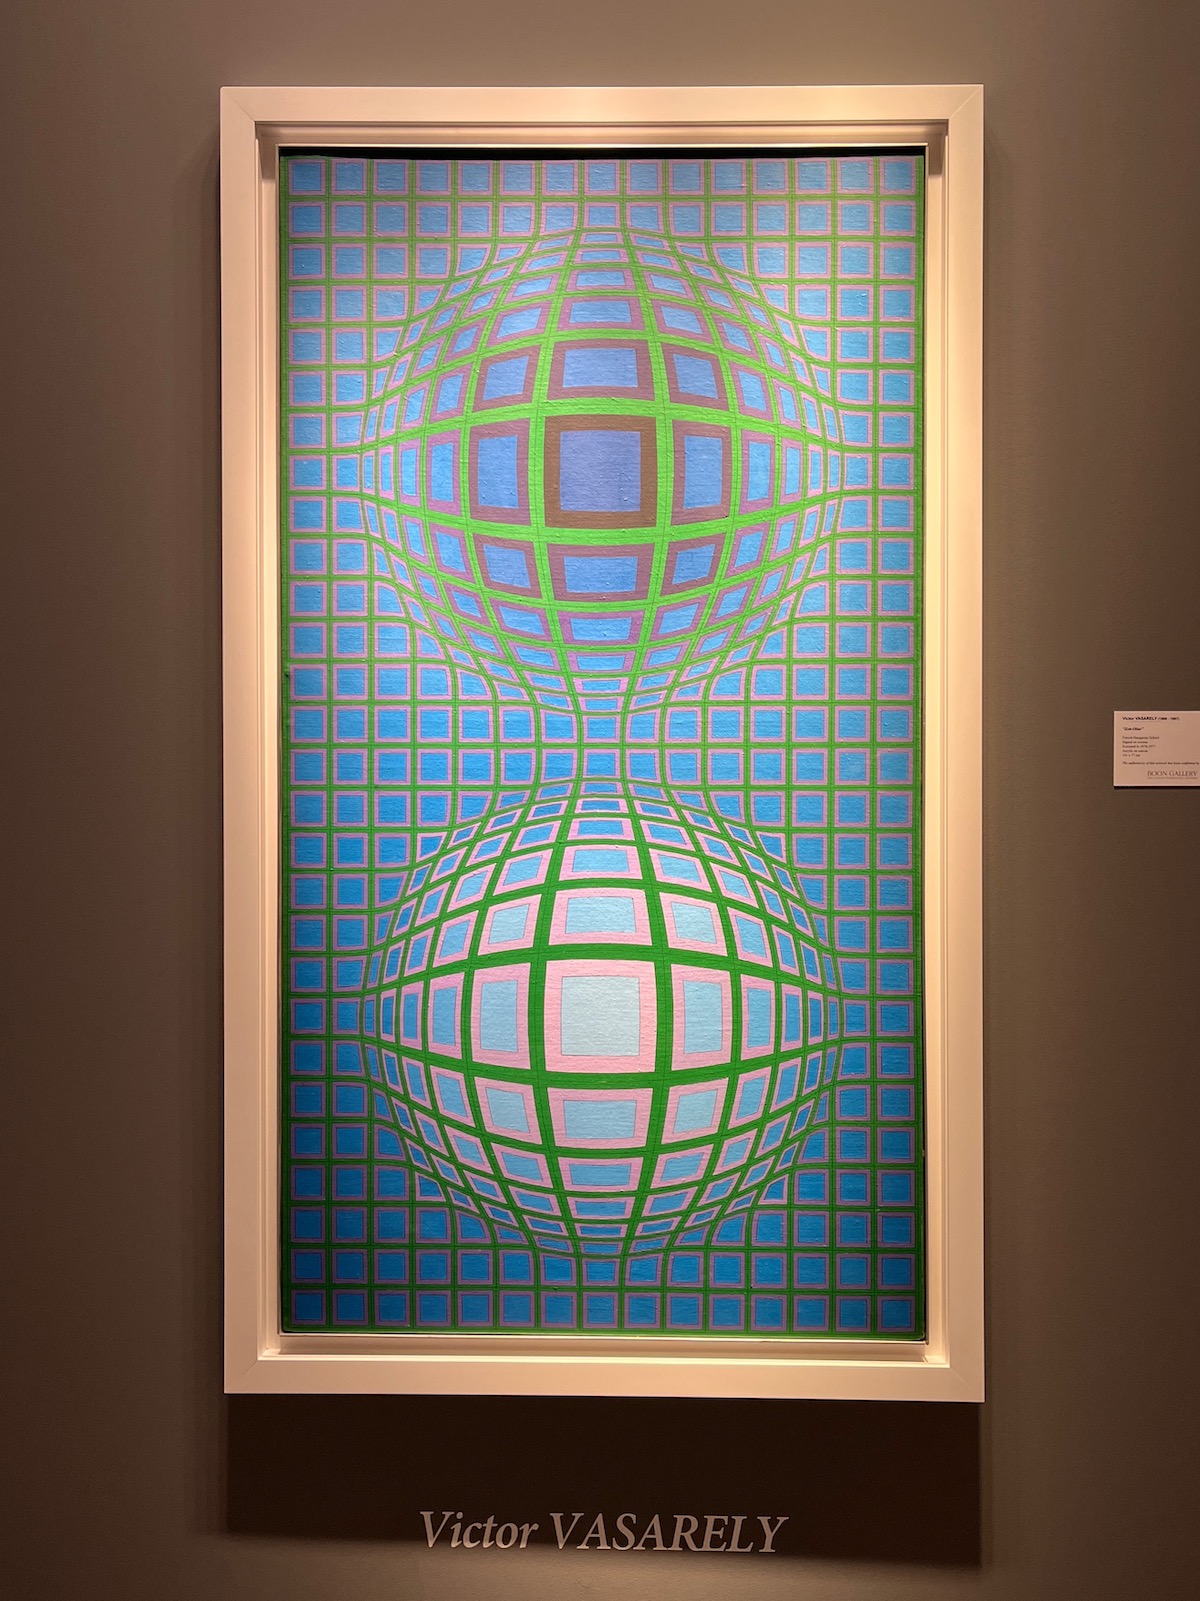 Victor Vasarely "Zet-Oltar" from 1974-1977, acrylic on canvas, at Boon Gallery at BRAFA 2023 in Effect Magazine